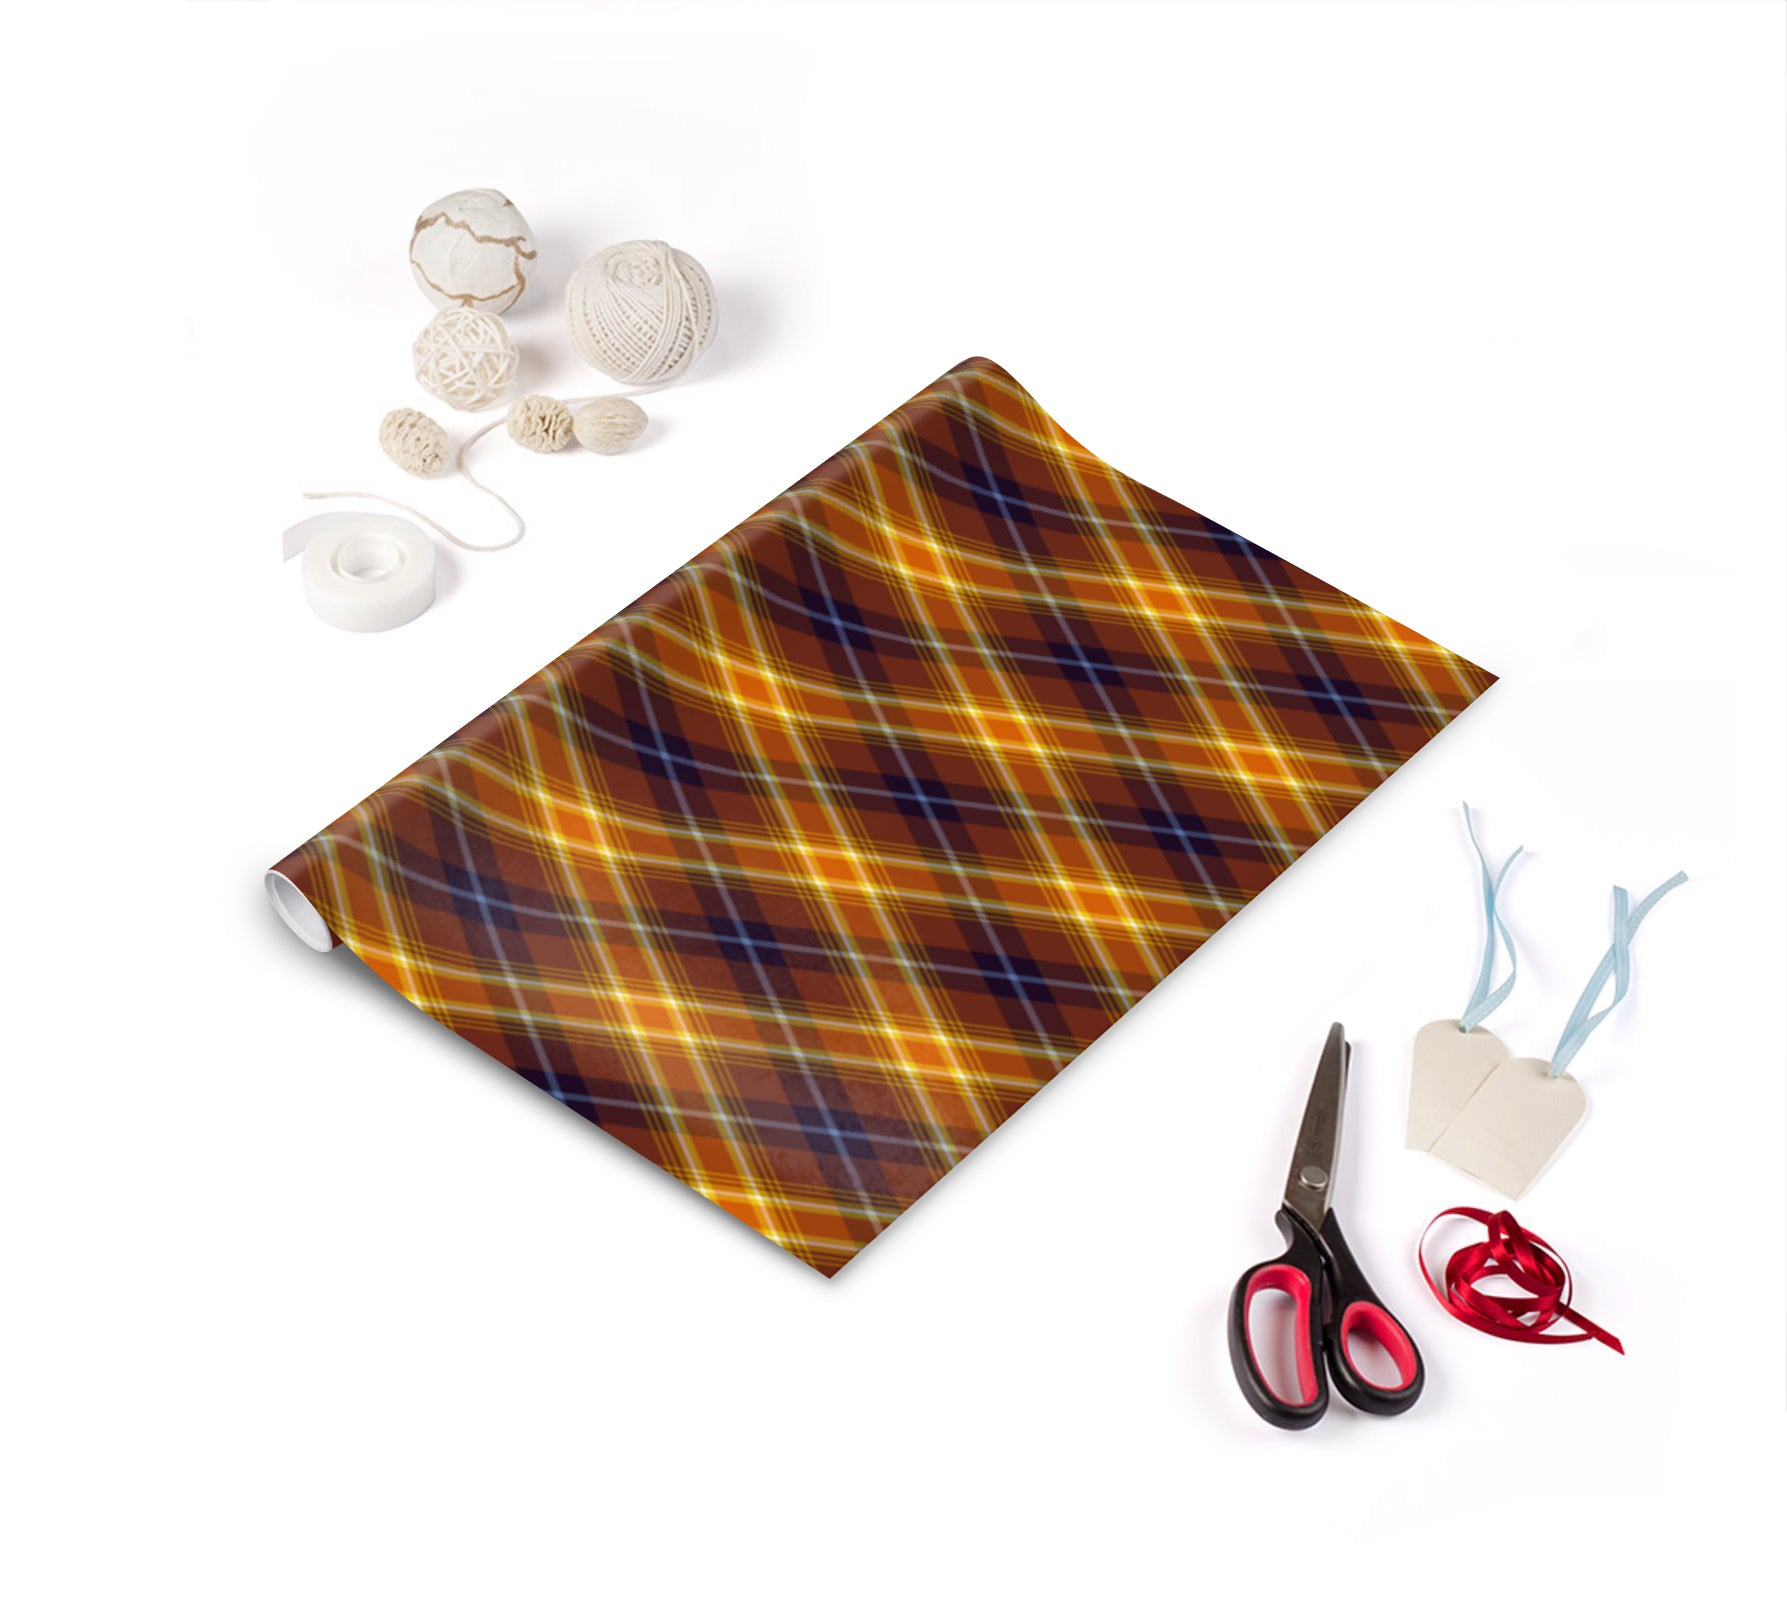 Designer wrapping paper exclusive to the Tartan Artisan ®. Featuring the iconic & luminous tartan ...the Angels' Share ®, created in 2016 to celebrate Scotch Whisky Scotland's world-famous national drink